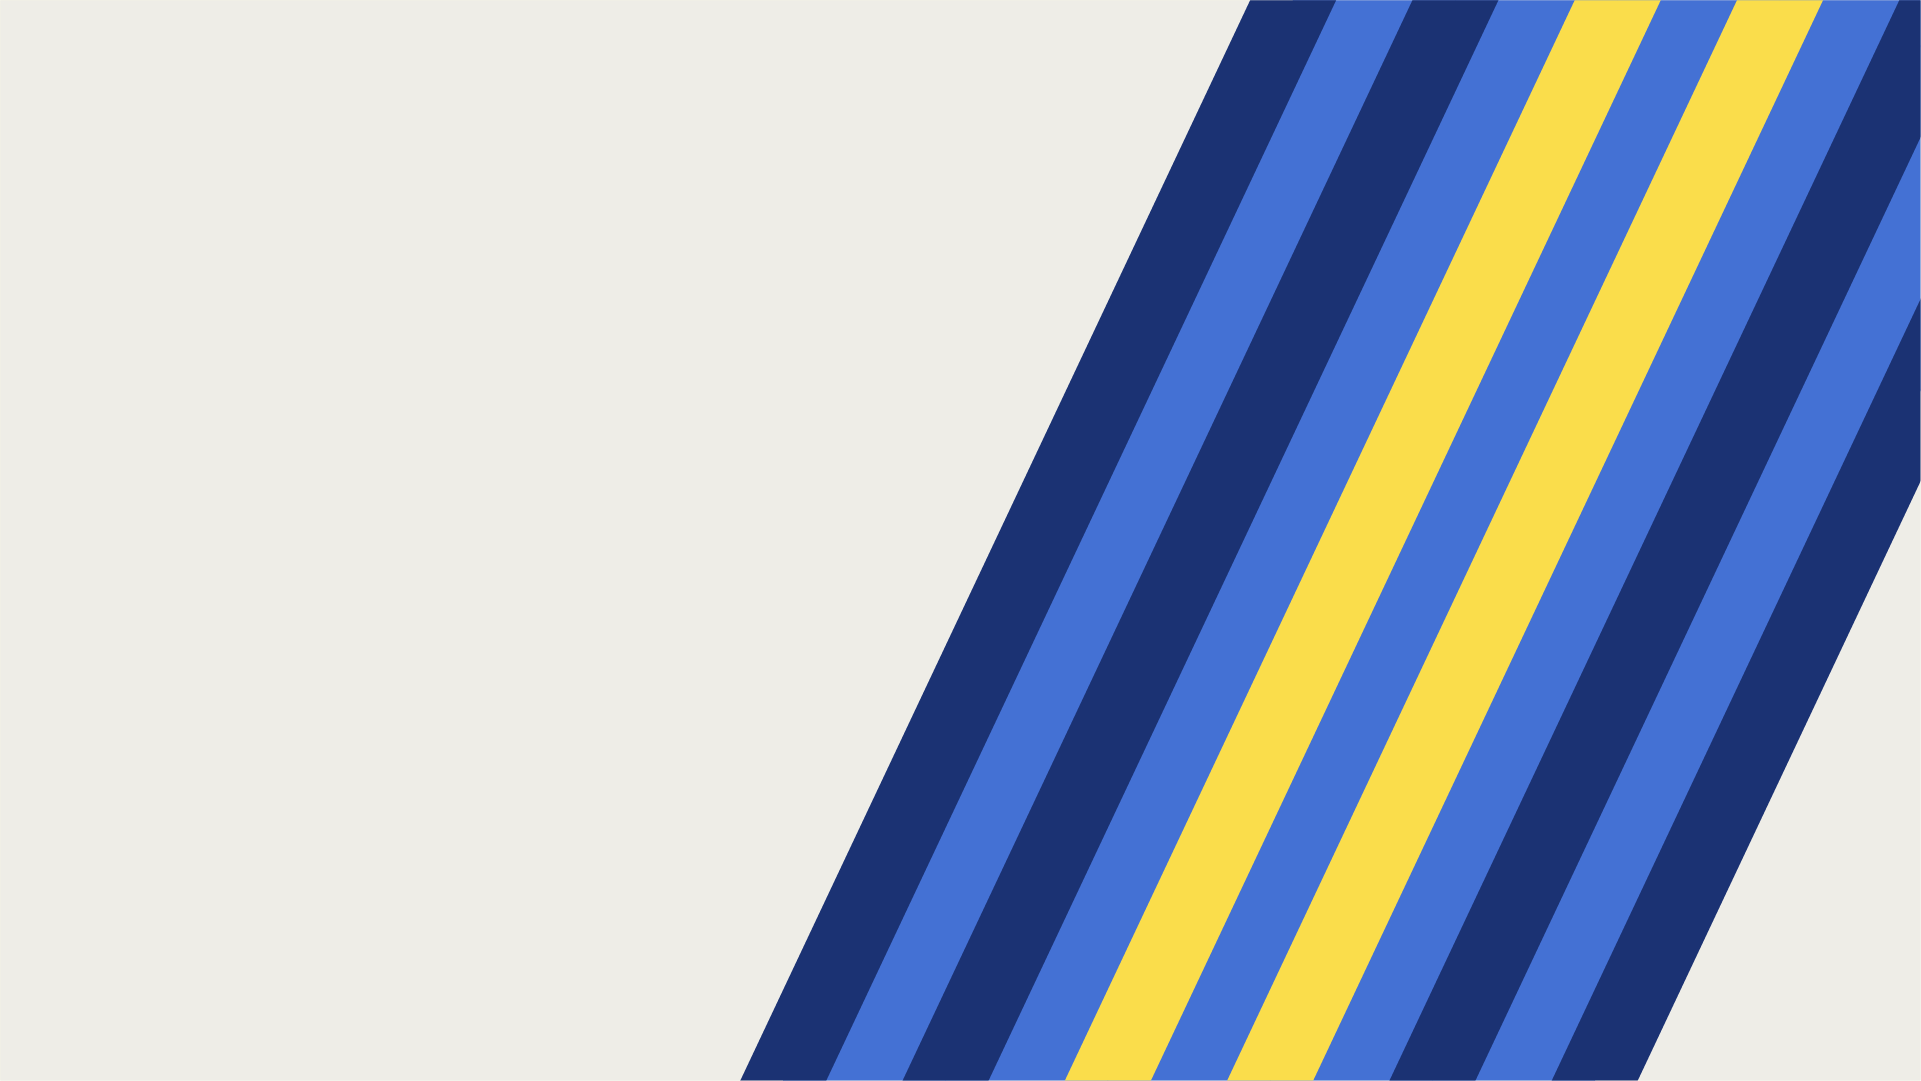 Clickable graphic for the Boston Marathon Guide, with blue and yellow stripes